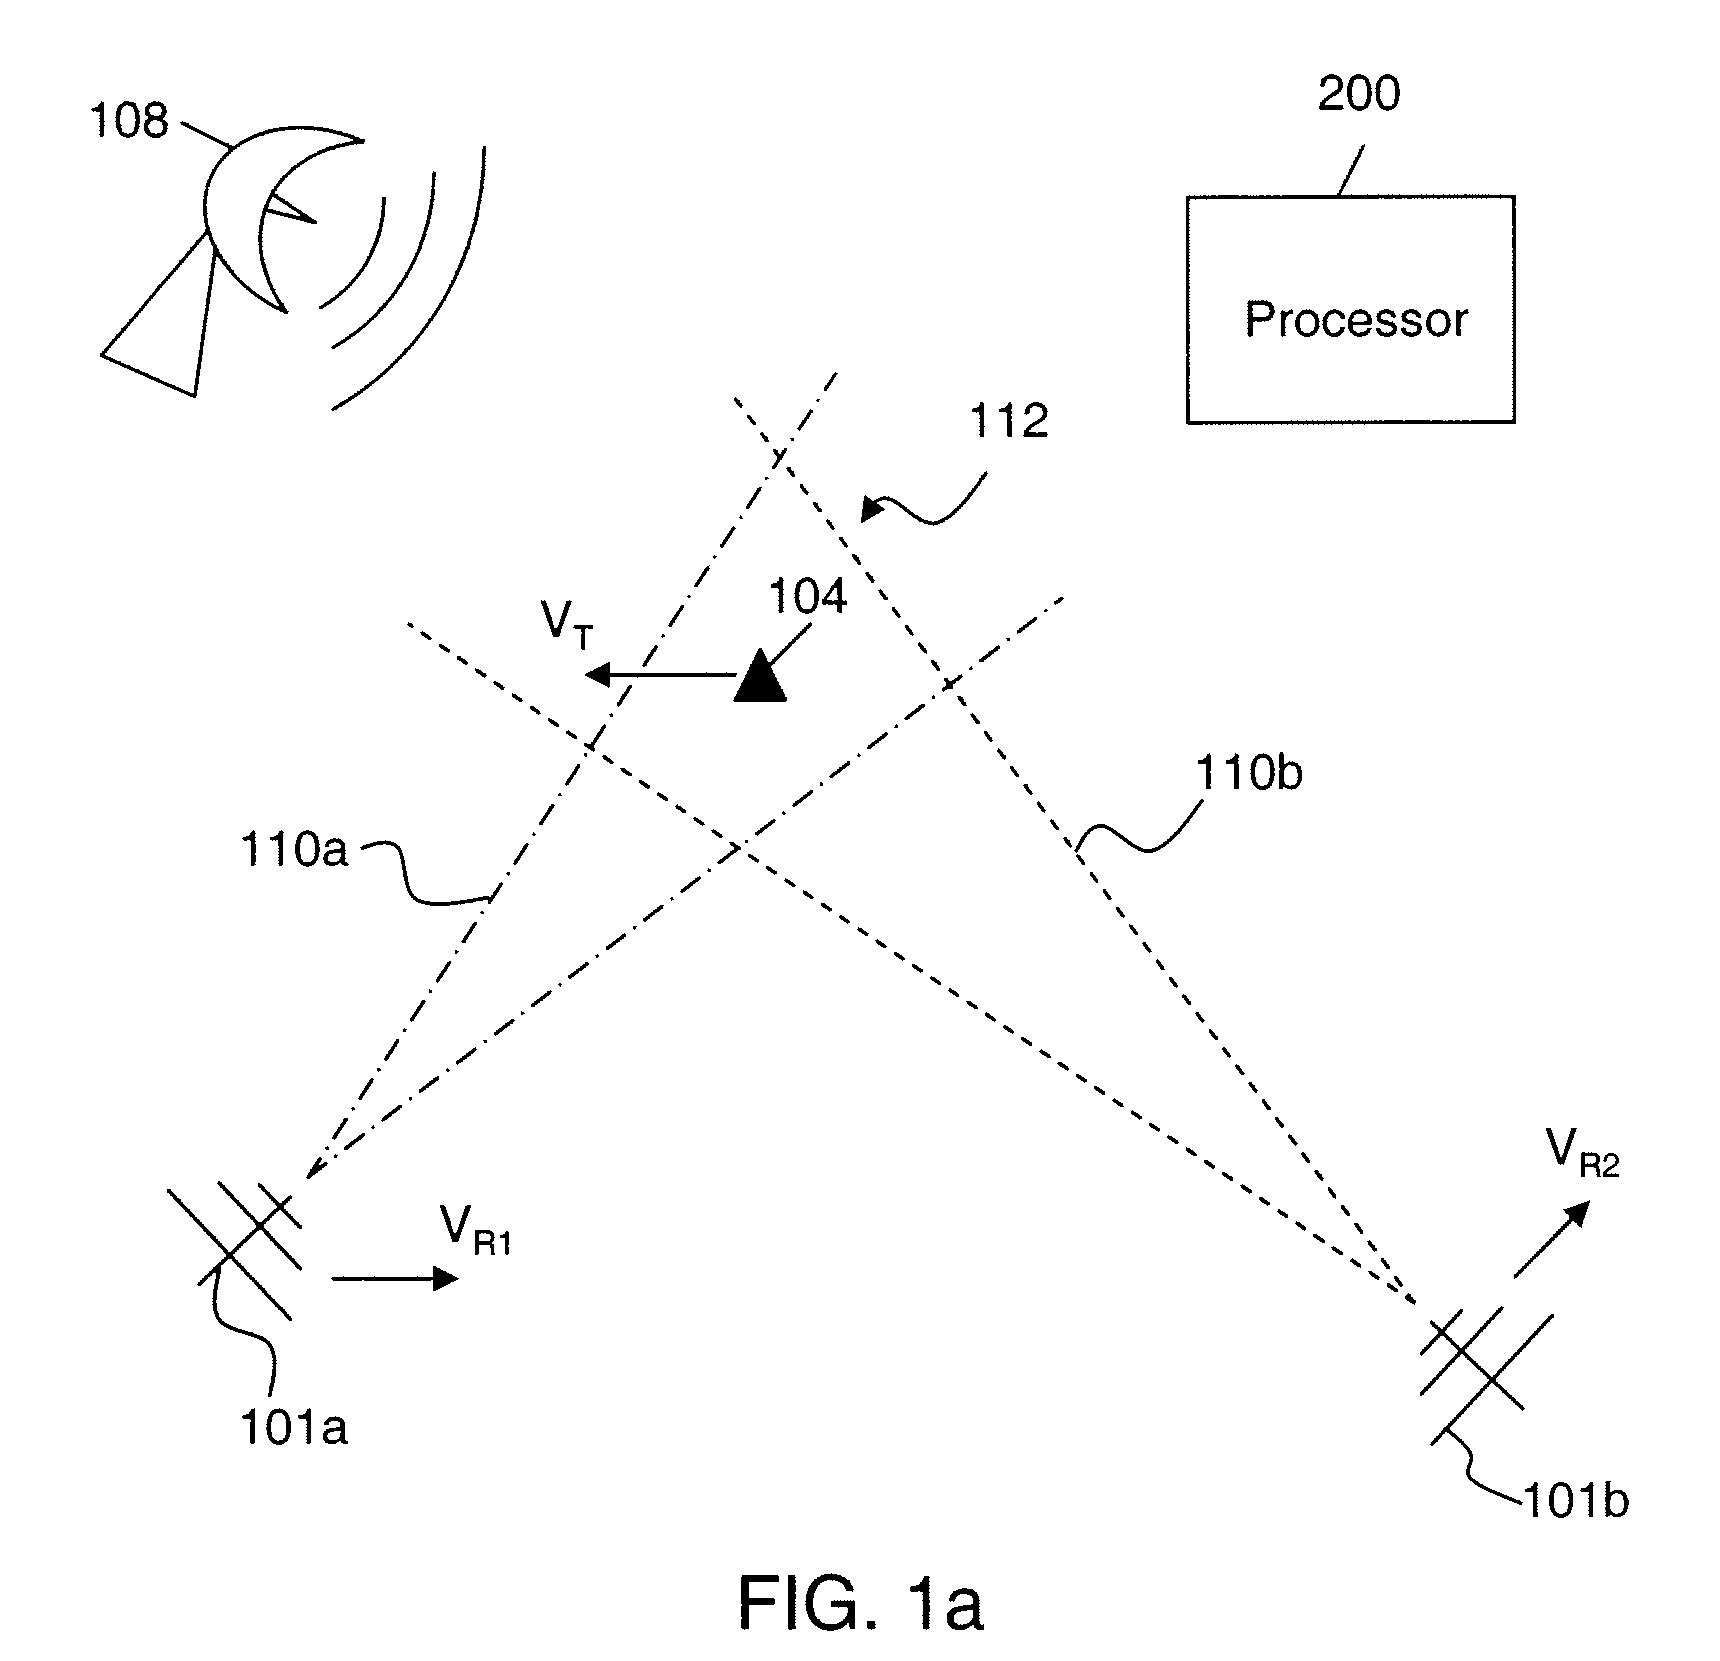 System and method for precision geolocation utilizing multiple sensing modalities